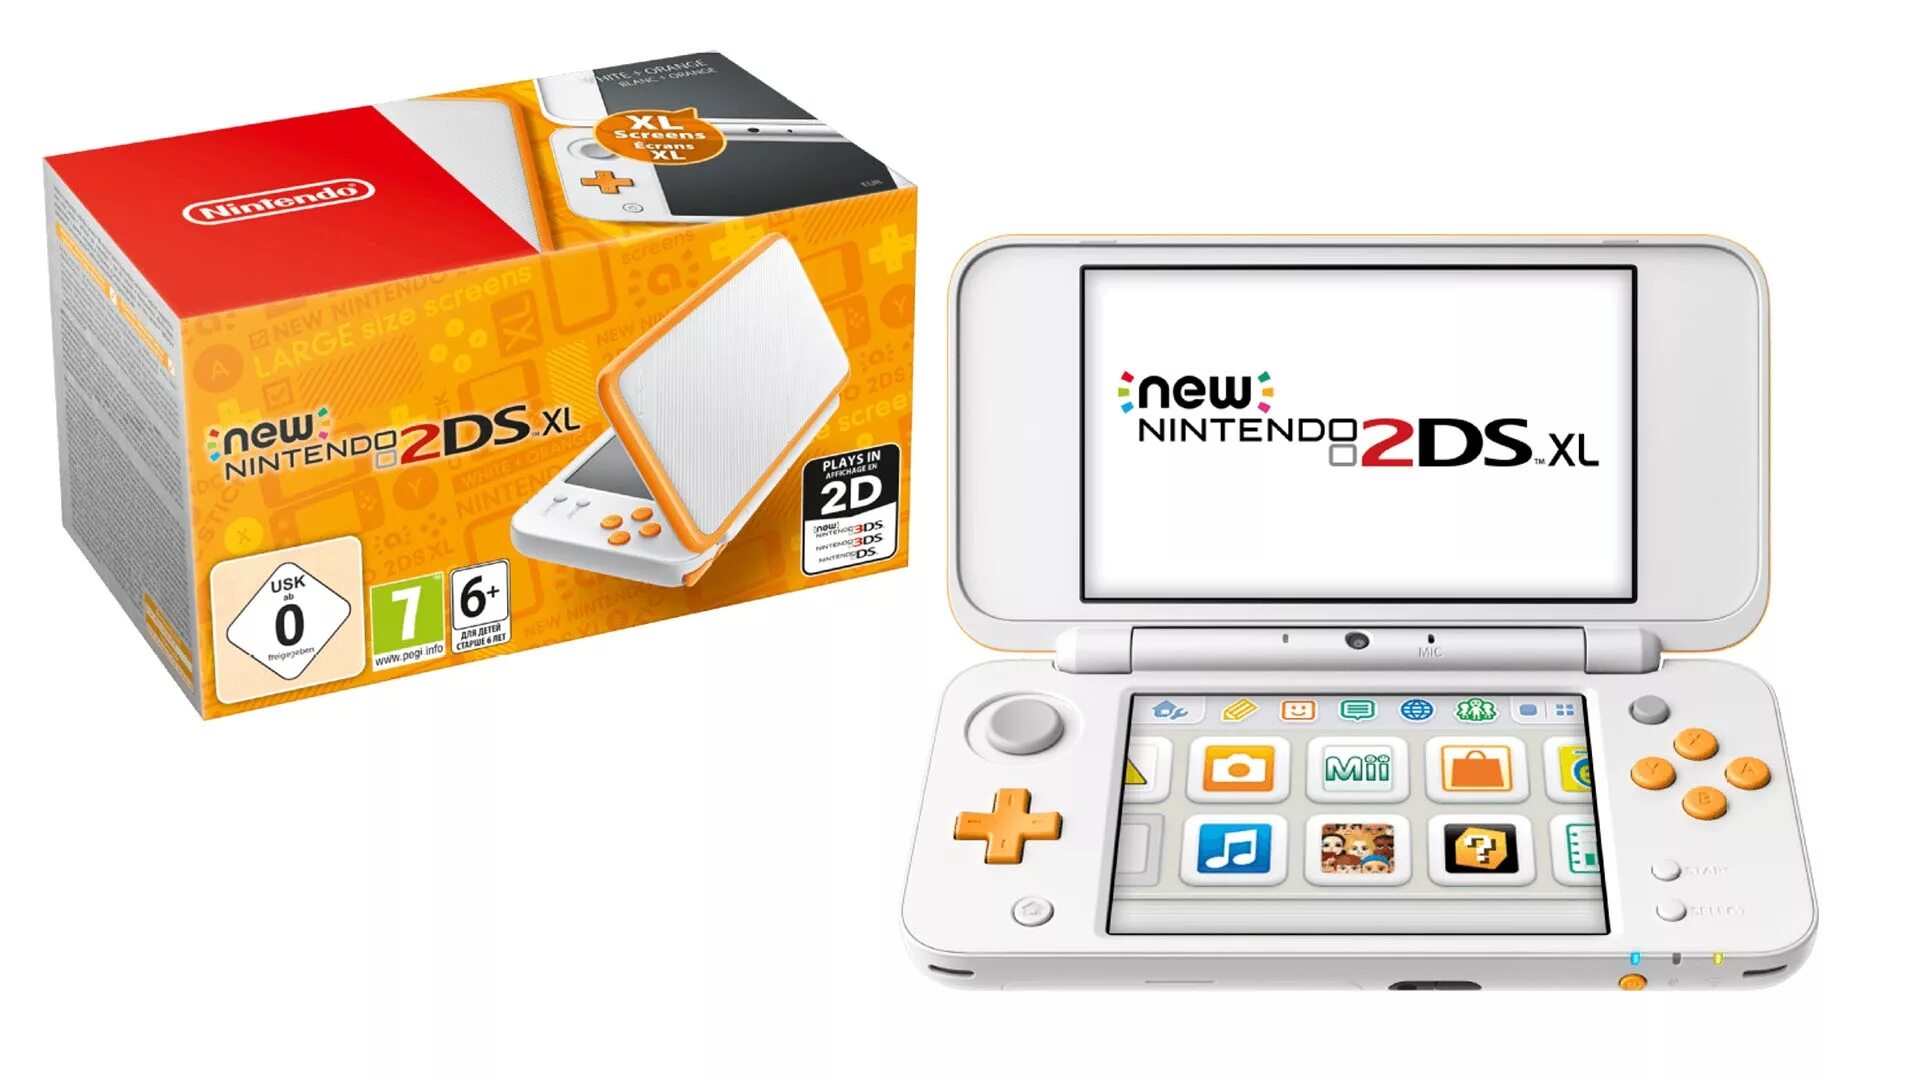 New 2ds xl. New Nintendo 2ds XL. Nintendo 2ds XL Воронеж. New 2ds XL Lime.